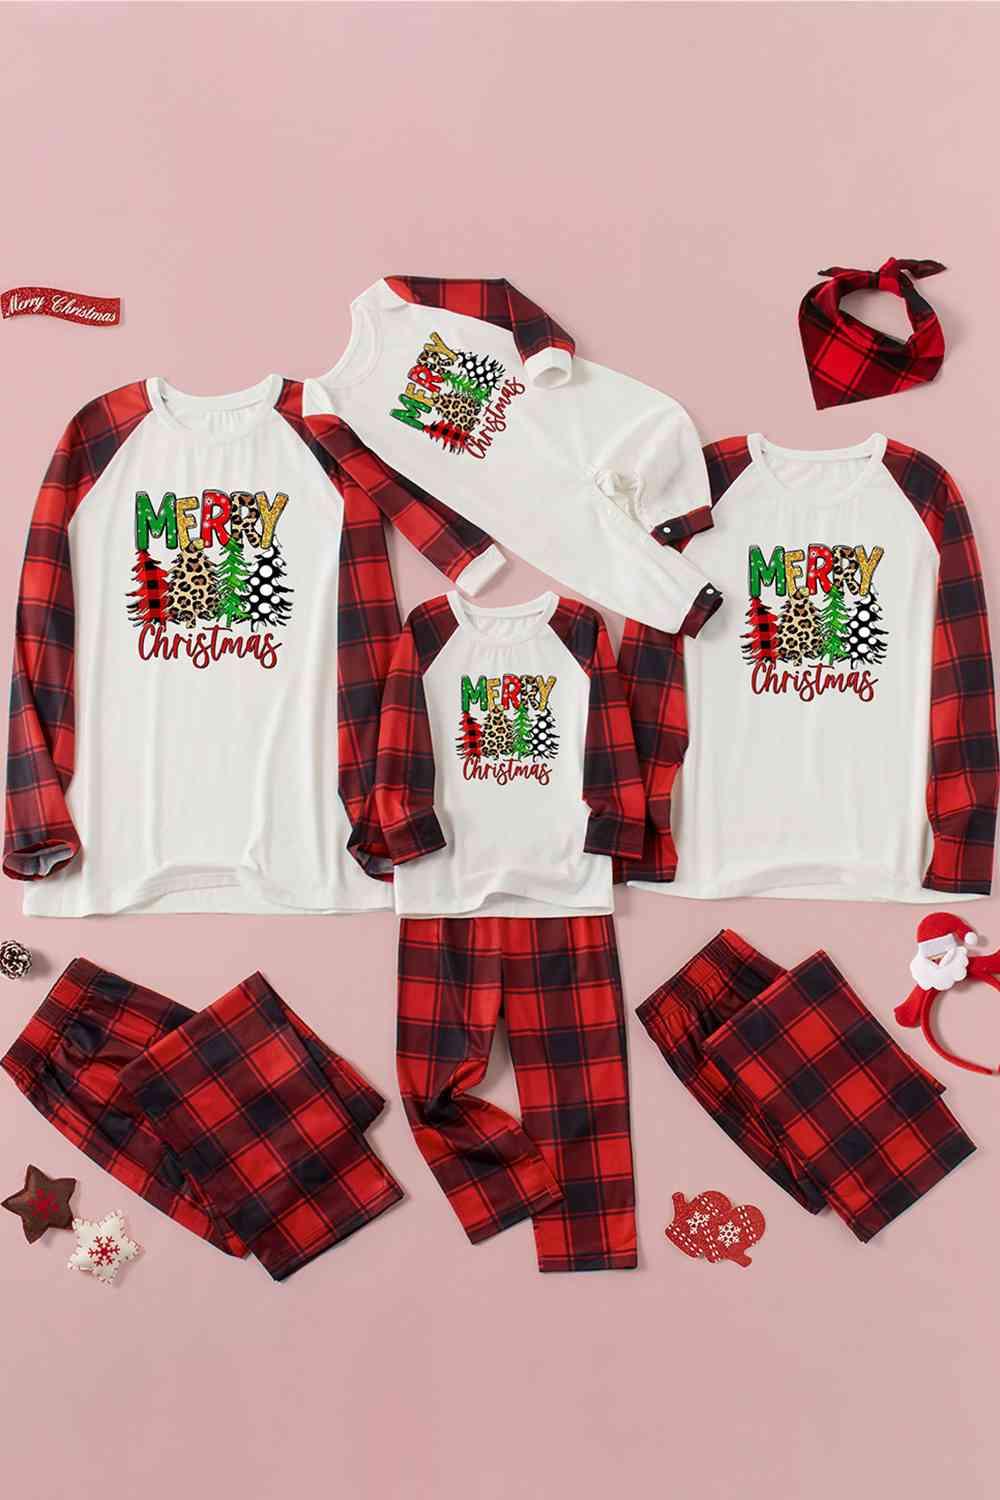 MERRY CHRISTMAS Graphic Top and Plaid Pants Set - Immenzive